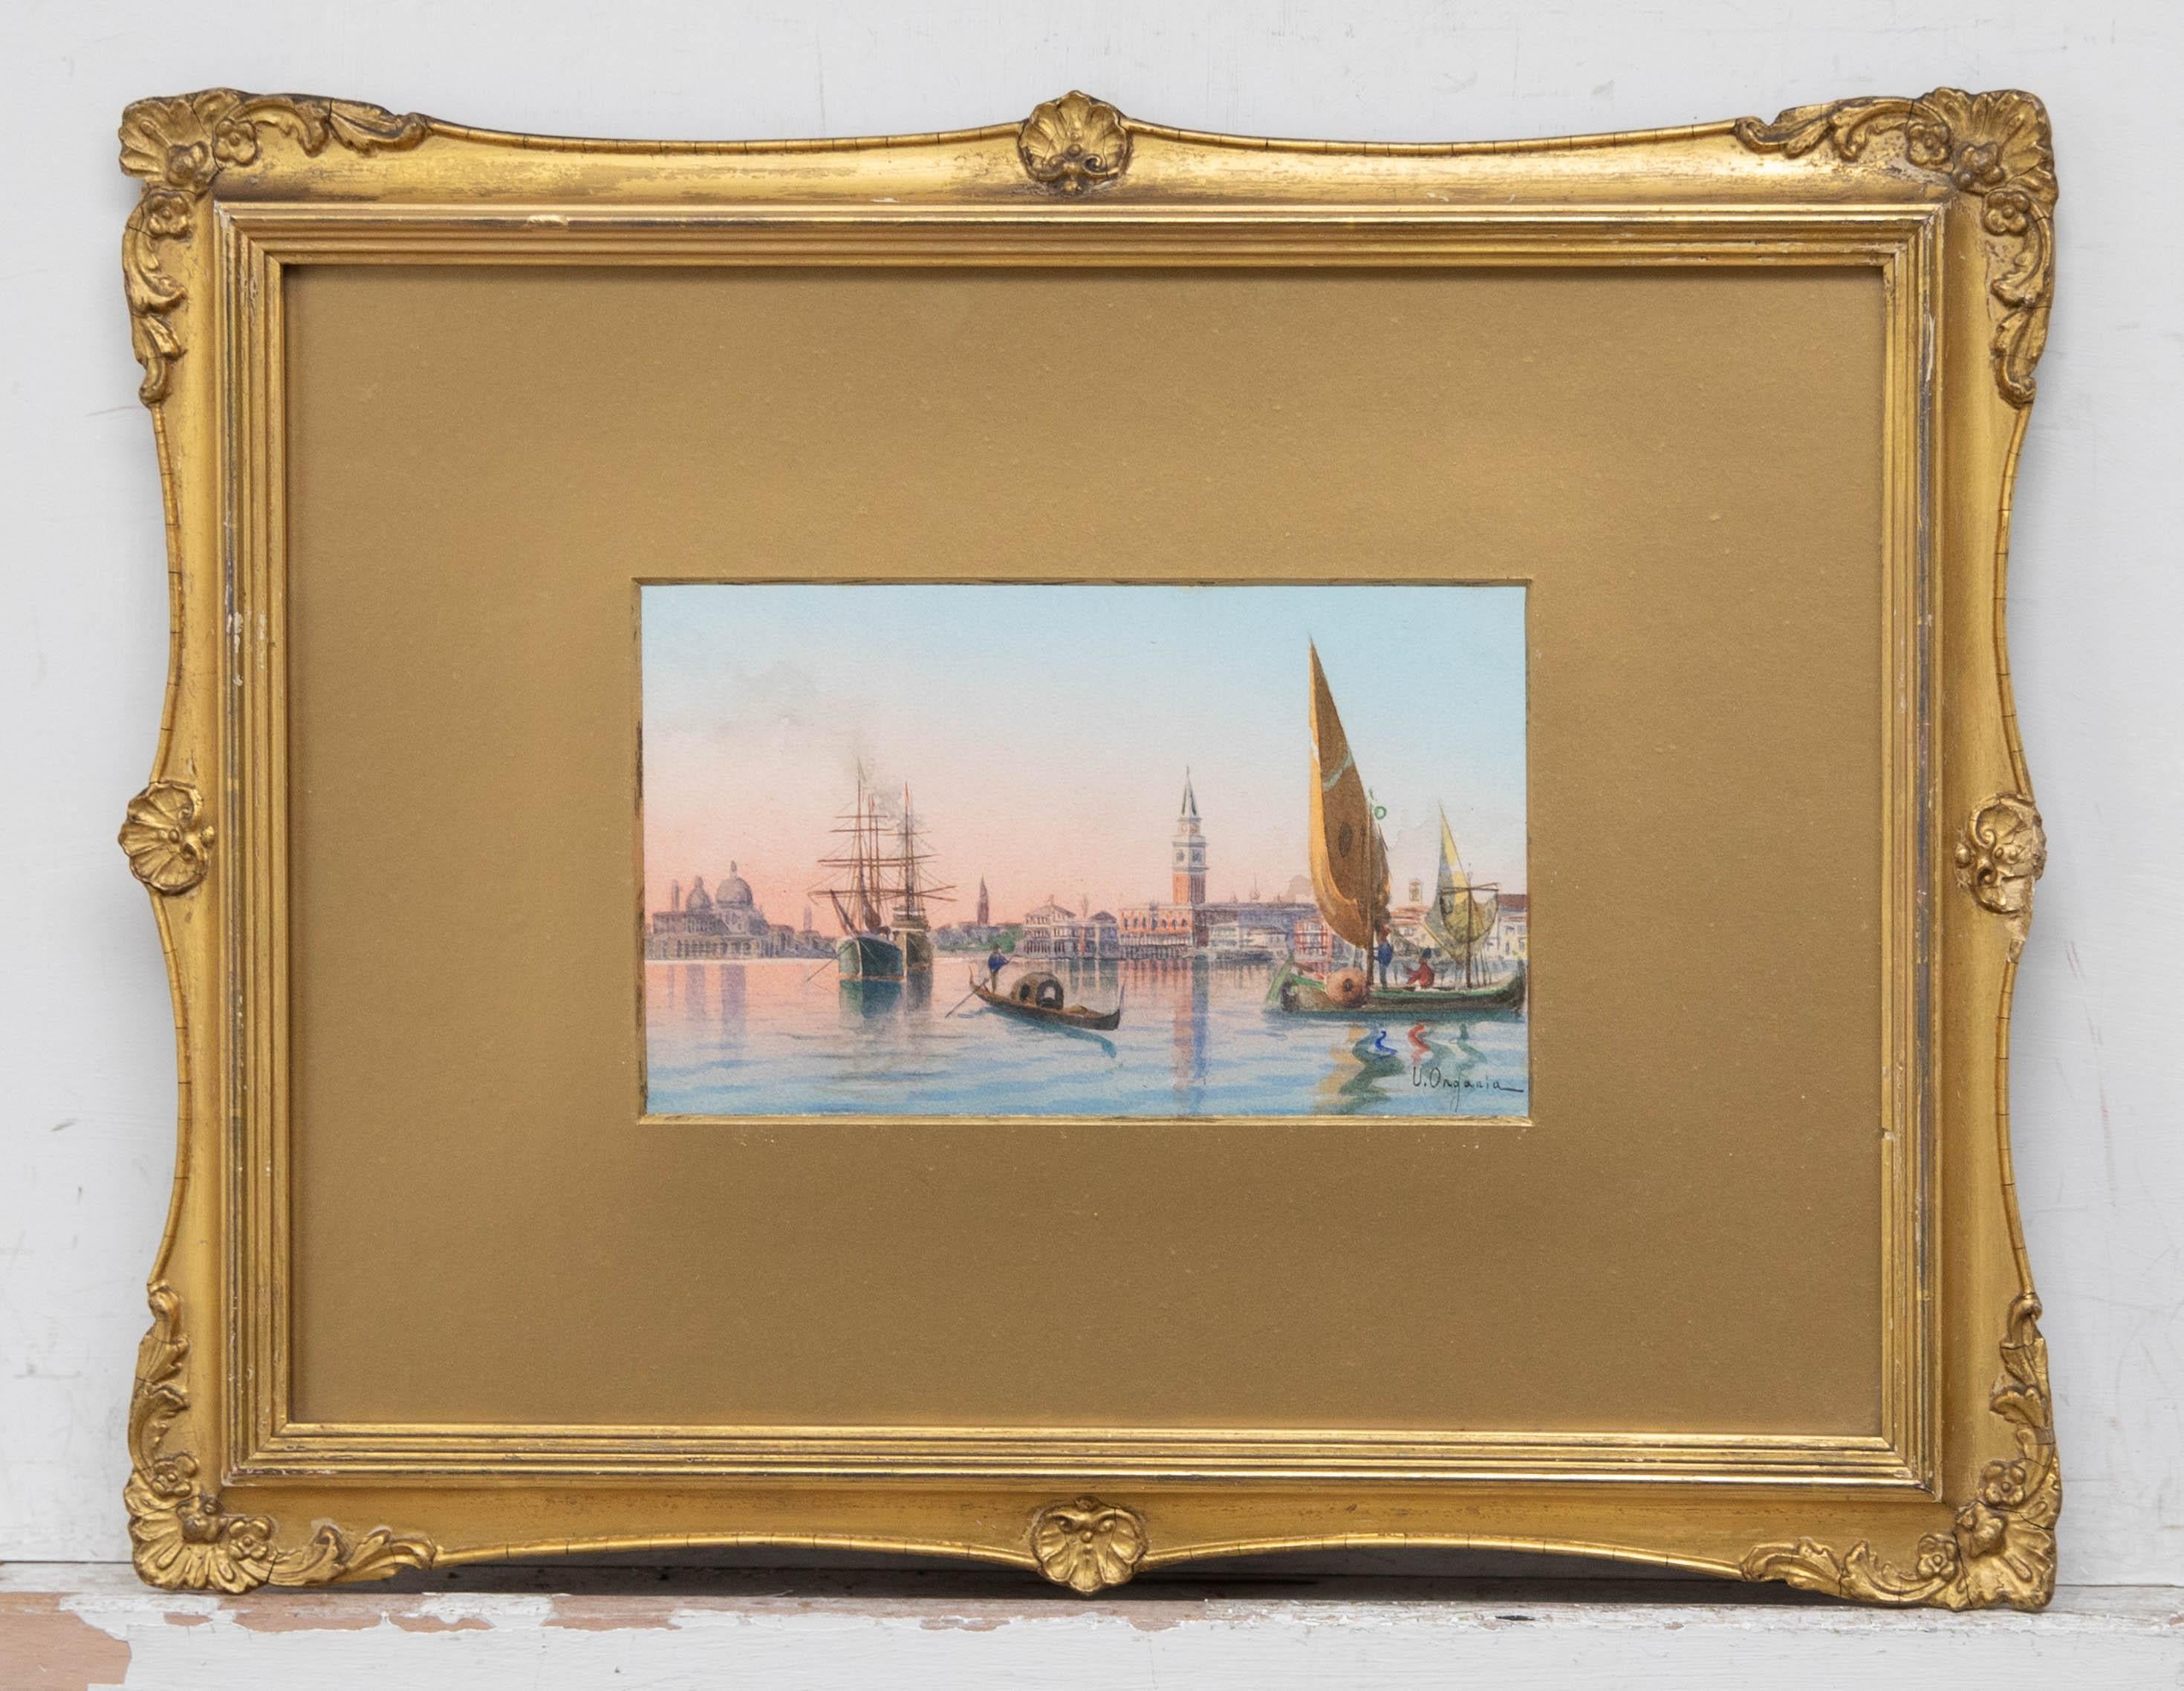 Signed to the lower right. Presented in a swept gilt frame and gold card mount. On paper.